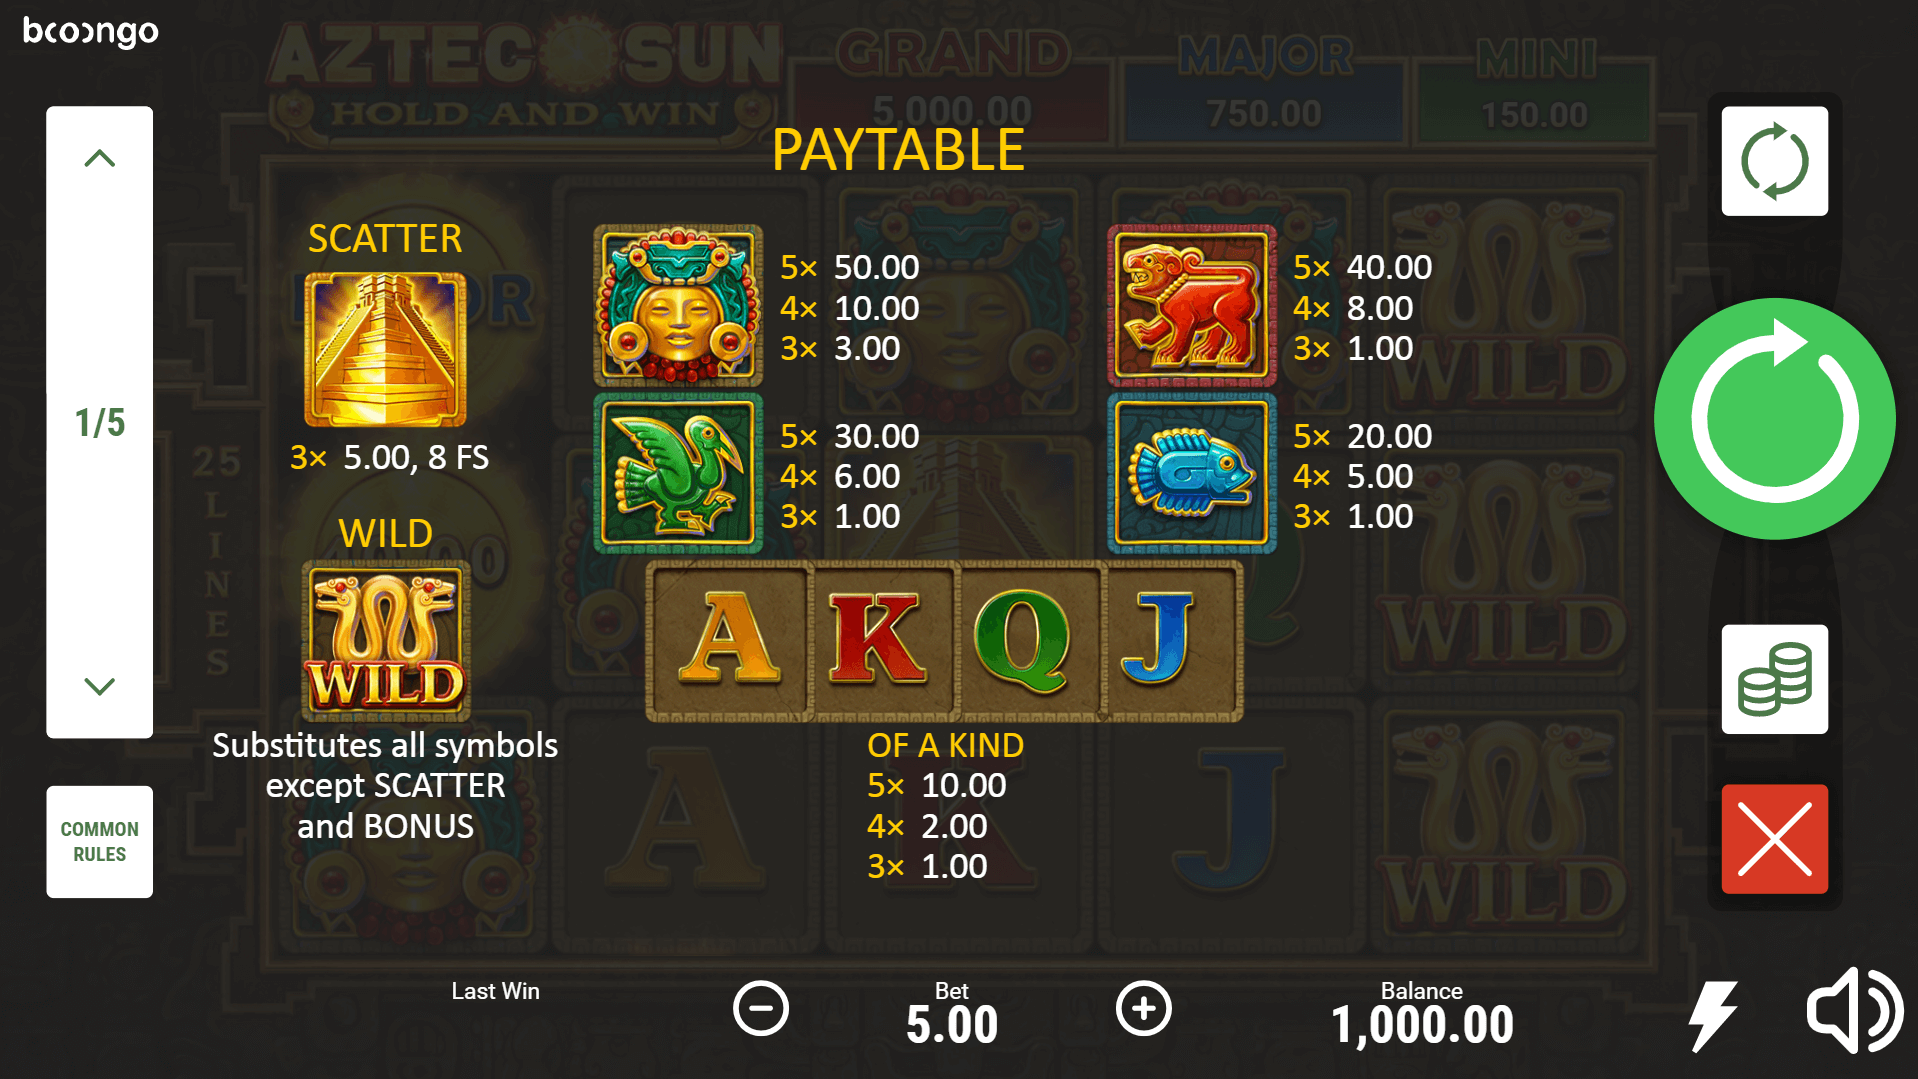 aztec sun hold and win slot machine detail image 0